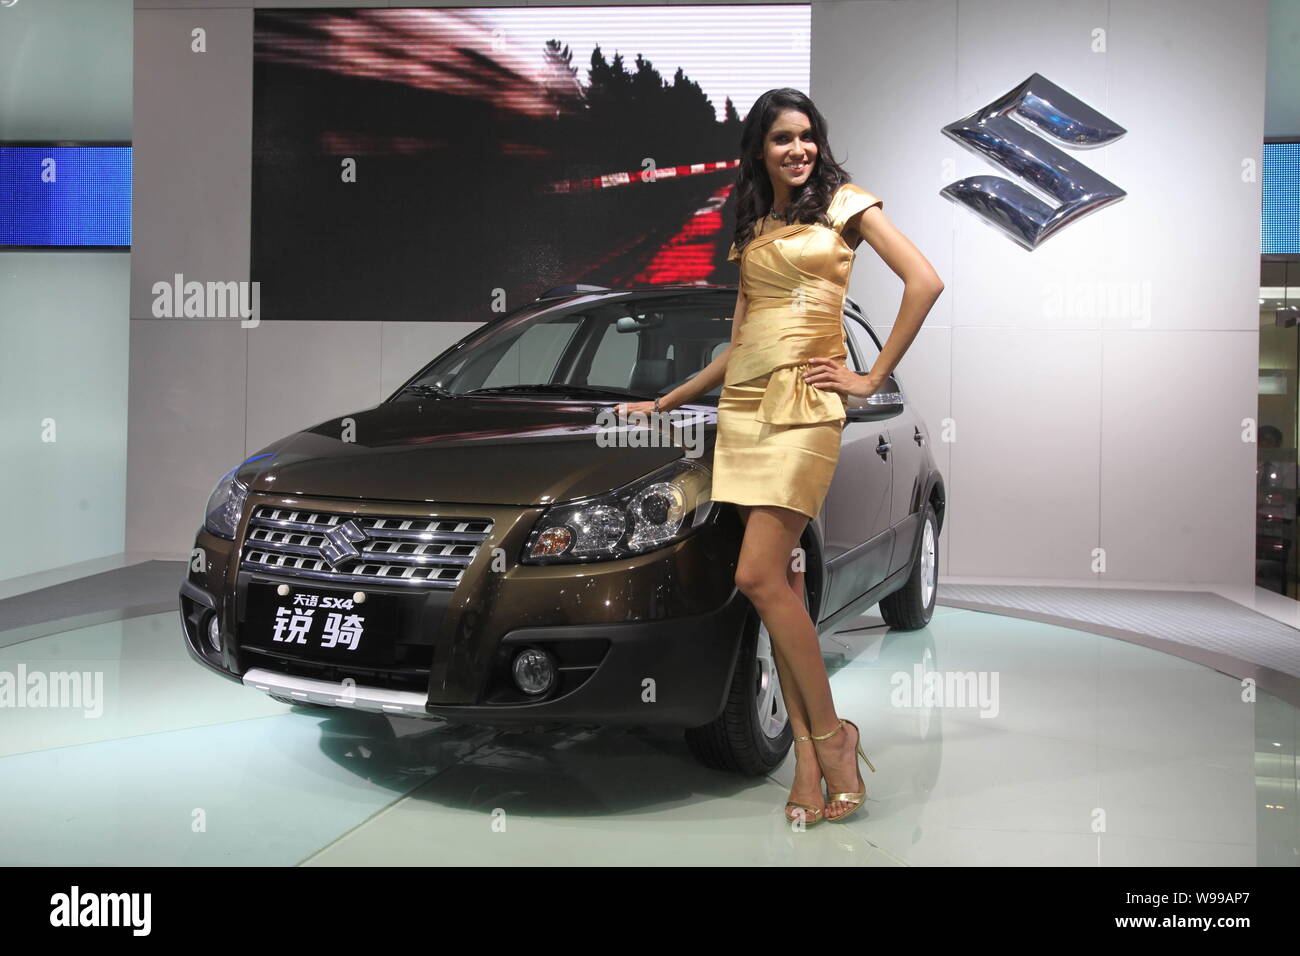 A model poses by a Suzuki SX4 during the 9th China (Guangzhou) International Automobile Exhibition, known as Auto Guangzhou 2011, in Guangzhou city, s Stock Photo